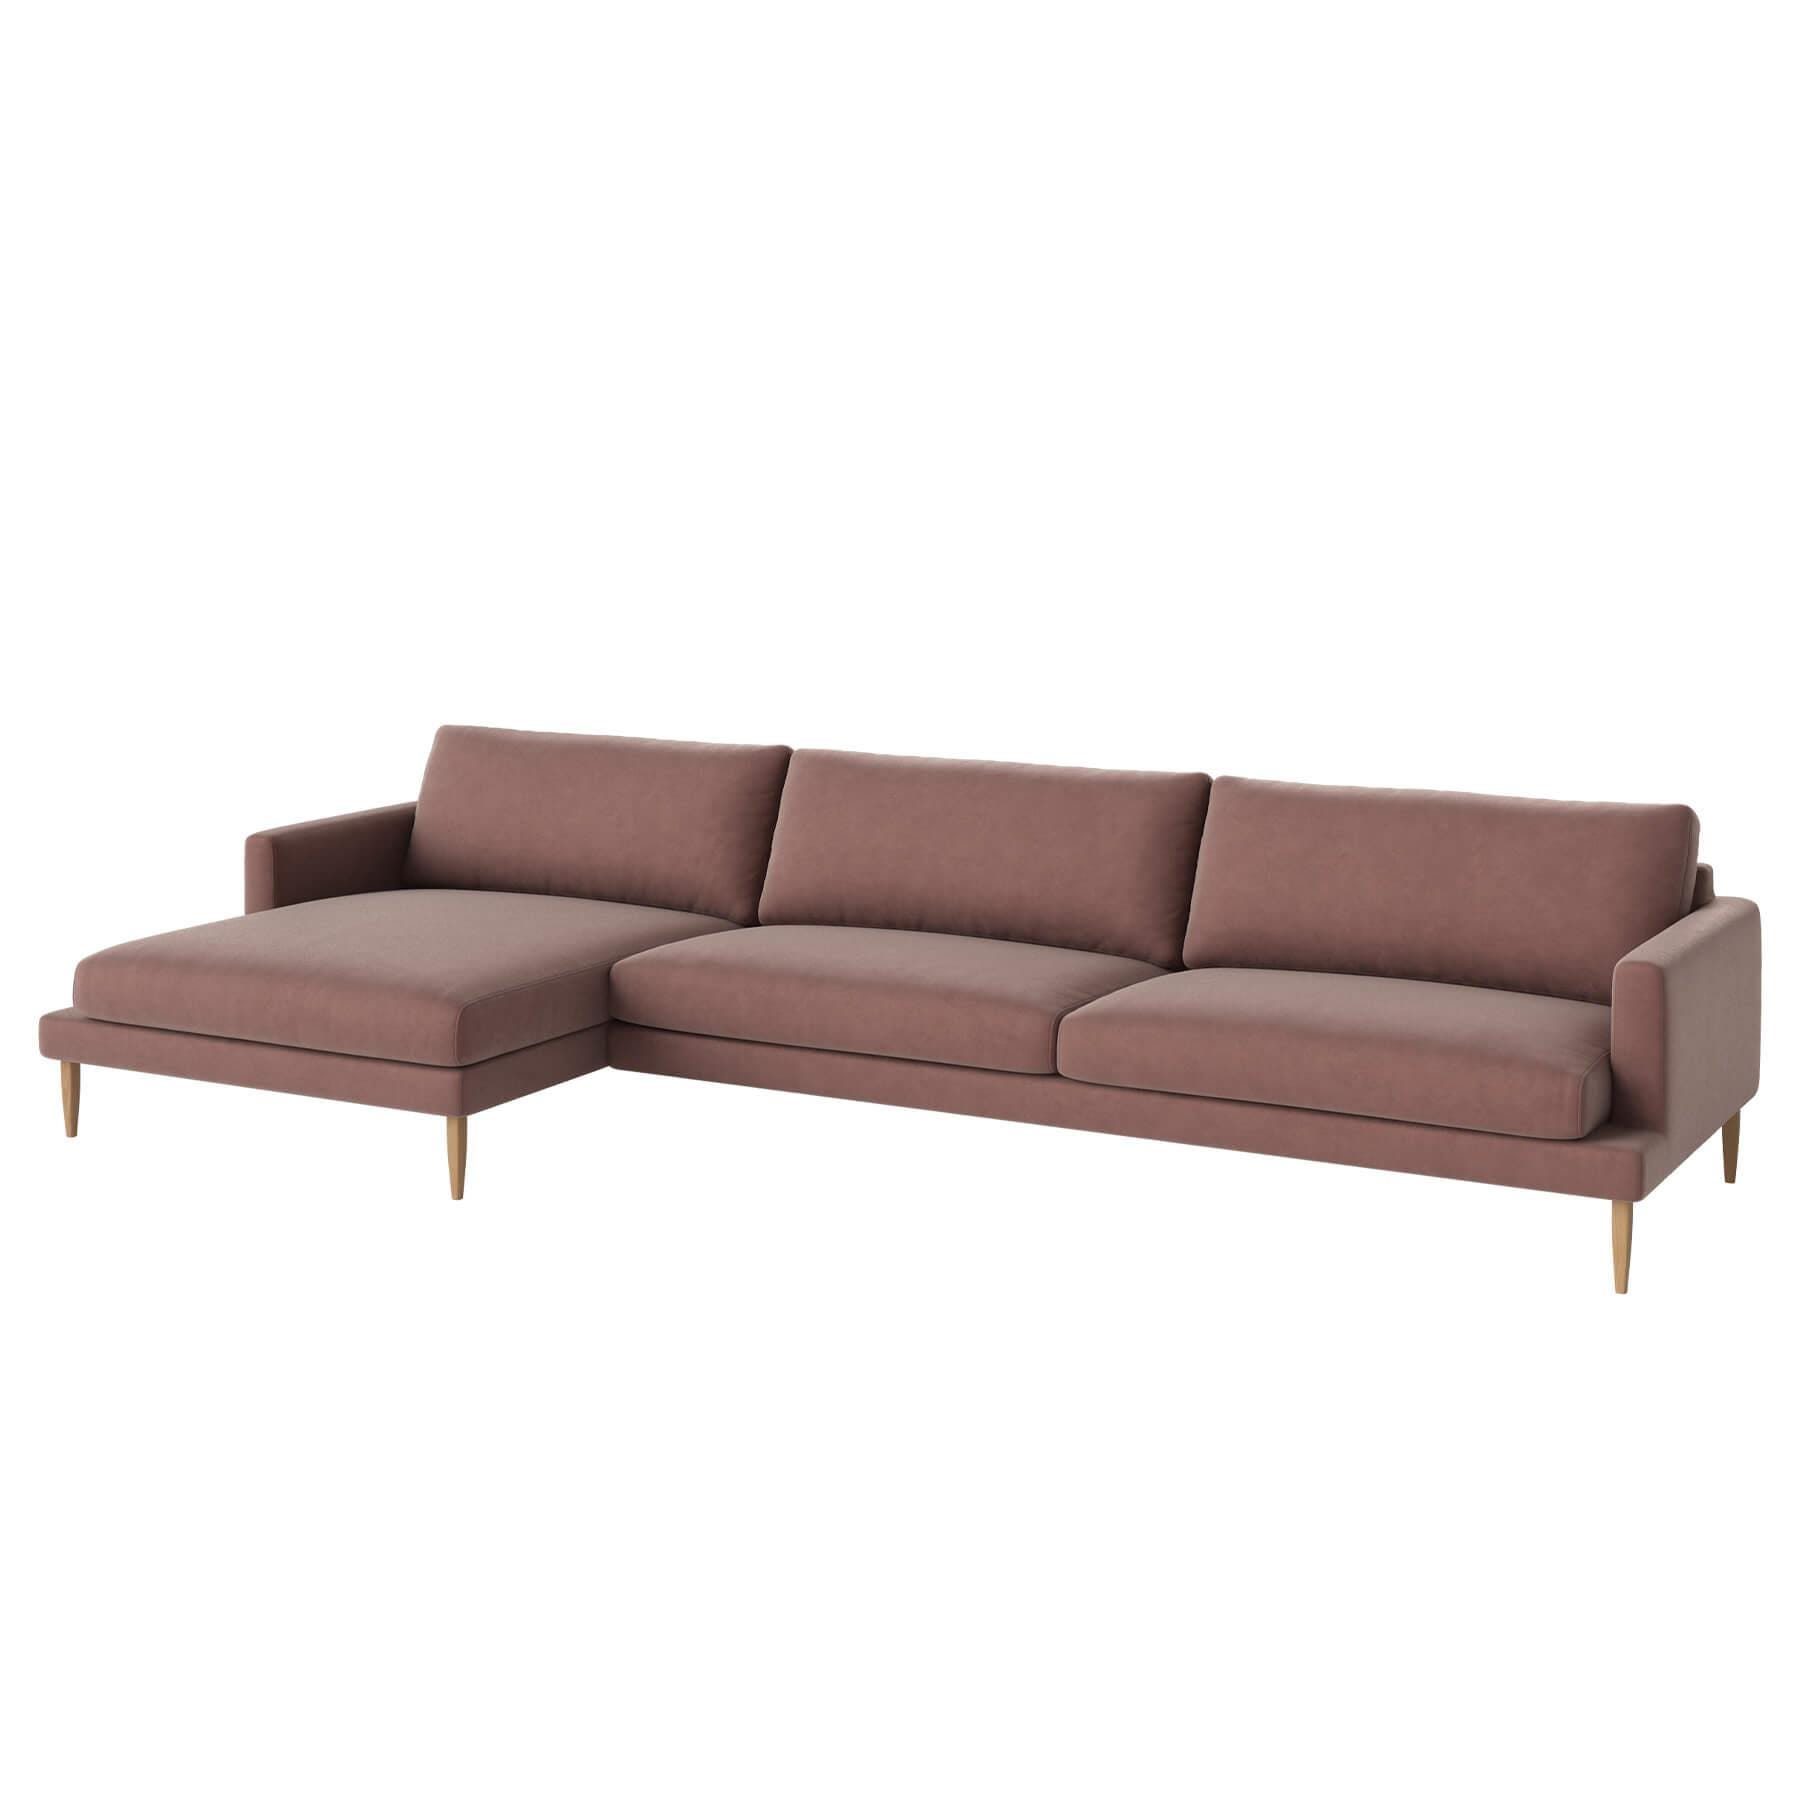 Bolia Veneda Sofa 45 Seater Sofa With Chaise Longue Oiled Oak Ritz Light Rosa Left Pink Designer Furniture From Holloways Of Ludlow